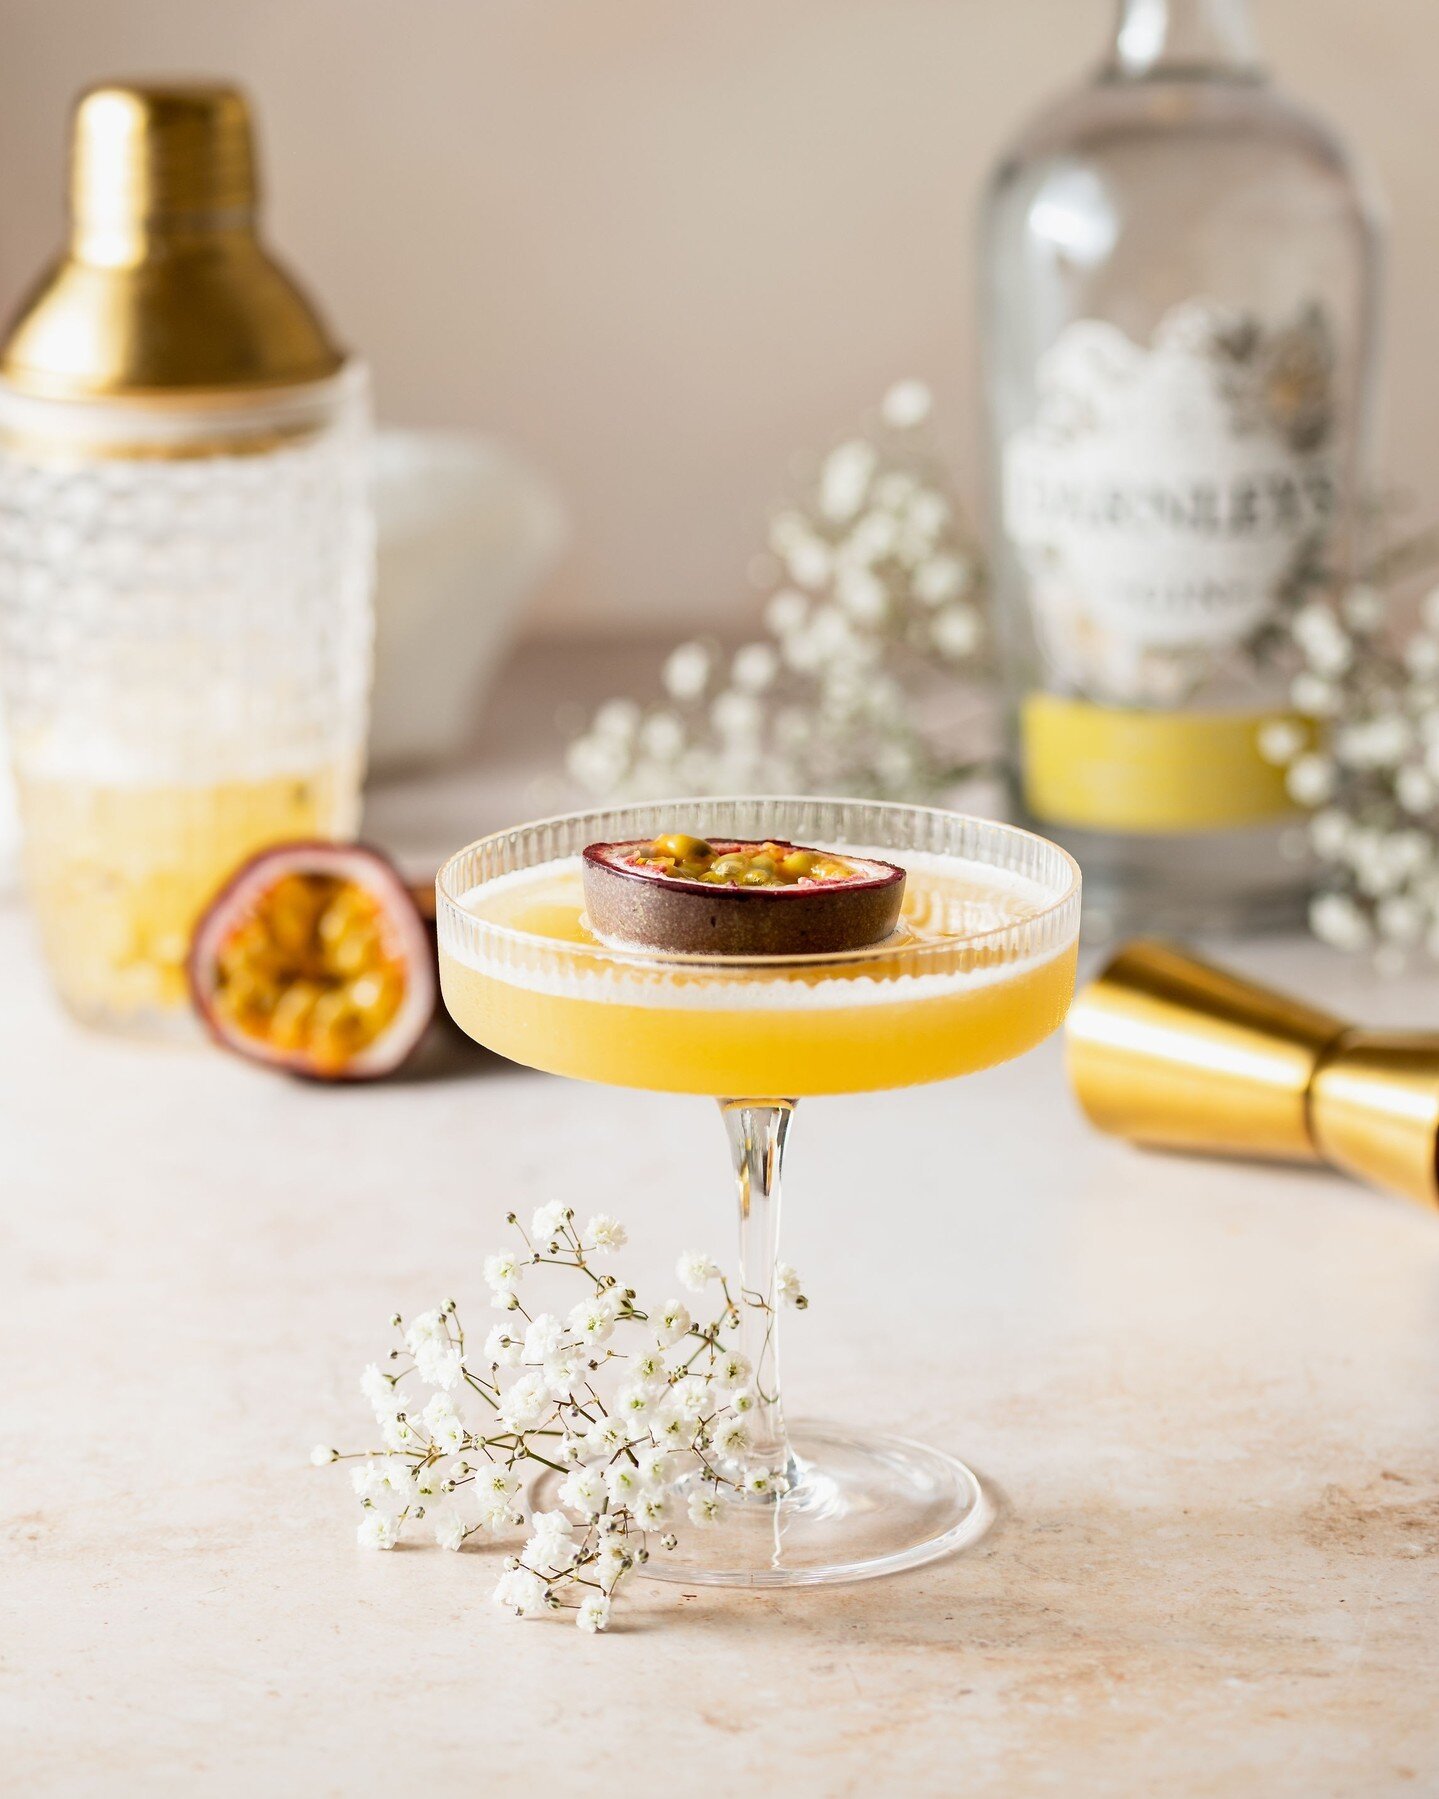 Transform your cocktail game with our 𝑷𝒂𝒔𝒔𝒊𝒐𝒏𝒇𝒓𝒖𝒊𝒕 𝒂𝒏𝒅 𝑬𝒍𝒅𝒆𝒓𝒇𝒍𝒐𝒘𝒆𝒓 𝑴𝒂𝒓𝒕𝒊𝒏𝒊🍸  Made with Darnley's Original Gin, this sophisticated serve is the perfect choice for weekend entertaining✨ 

Make it yourself at home 🏠 Sw